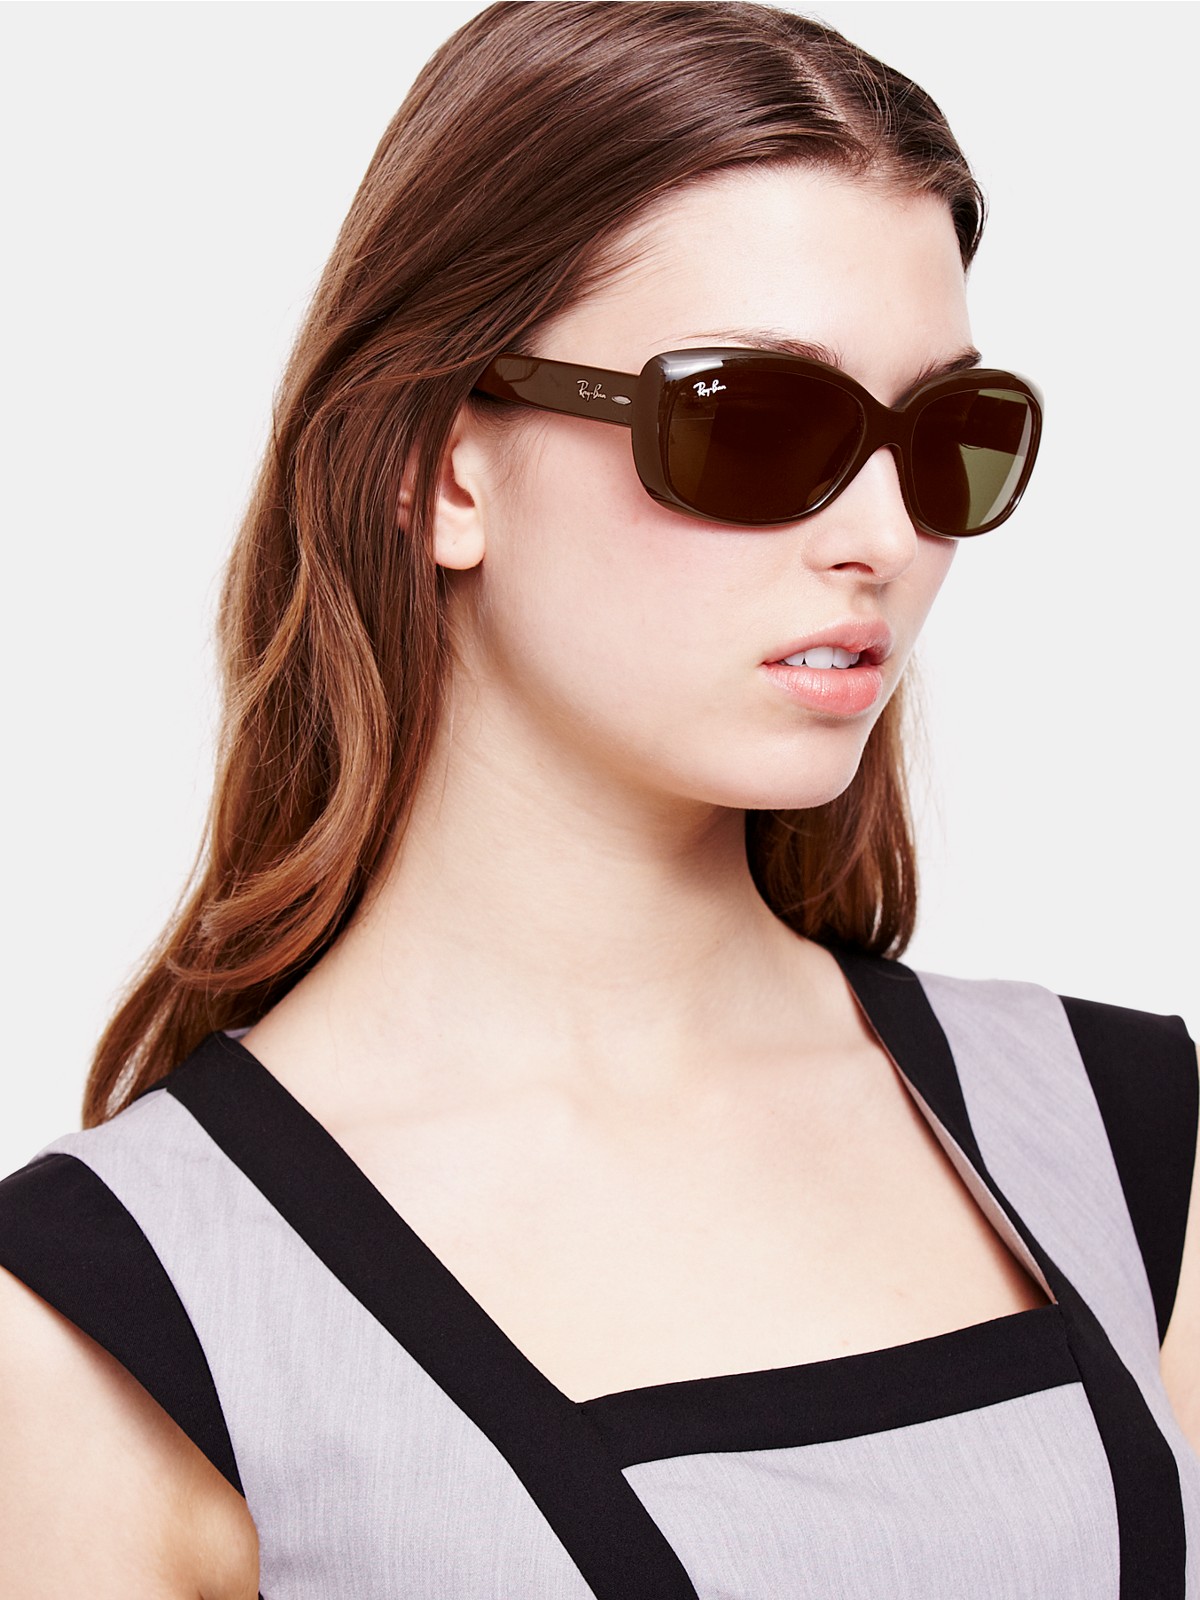 ray ban rb4101 jackie ohh sunglasses